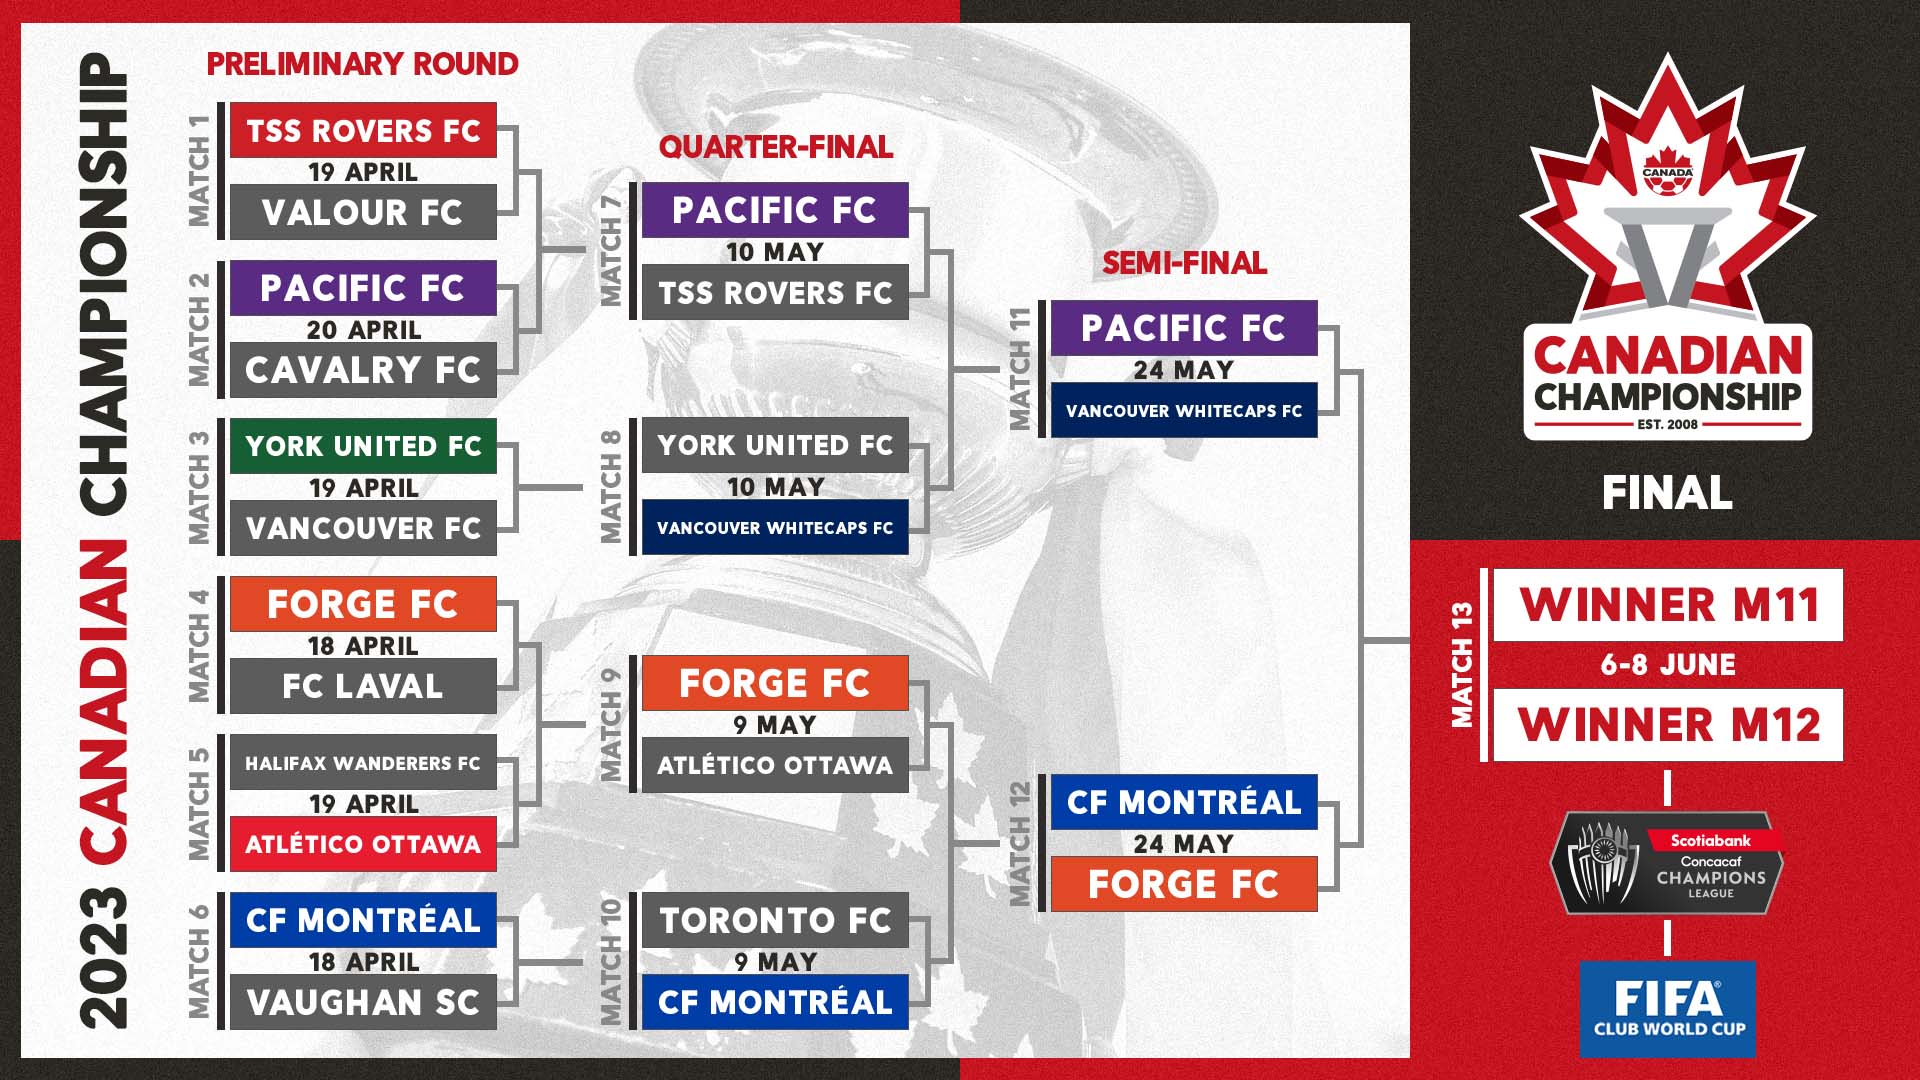 Canadian Championship Semi-Finals set for 24 May Doubleheader